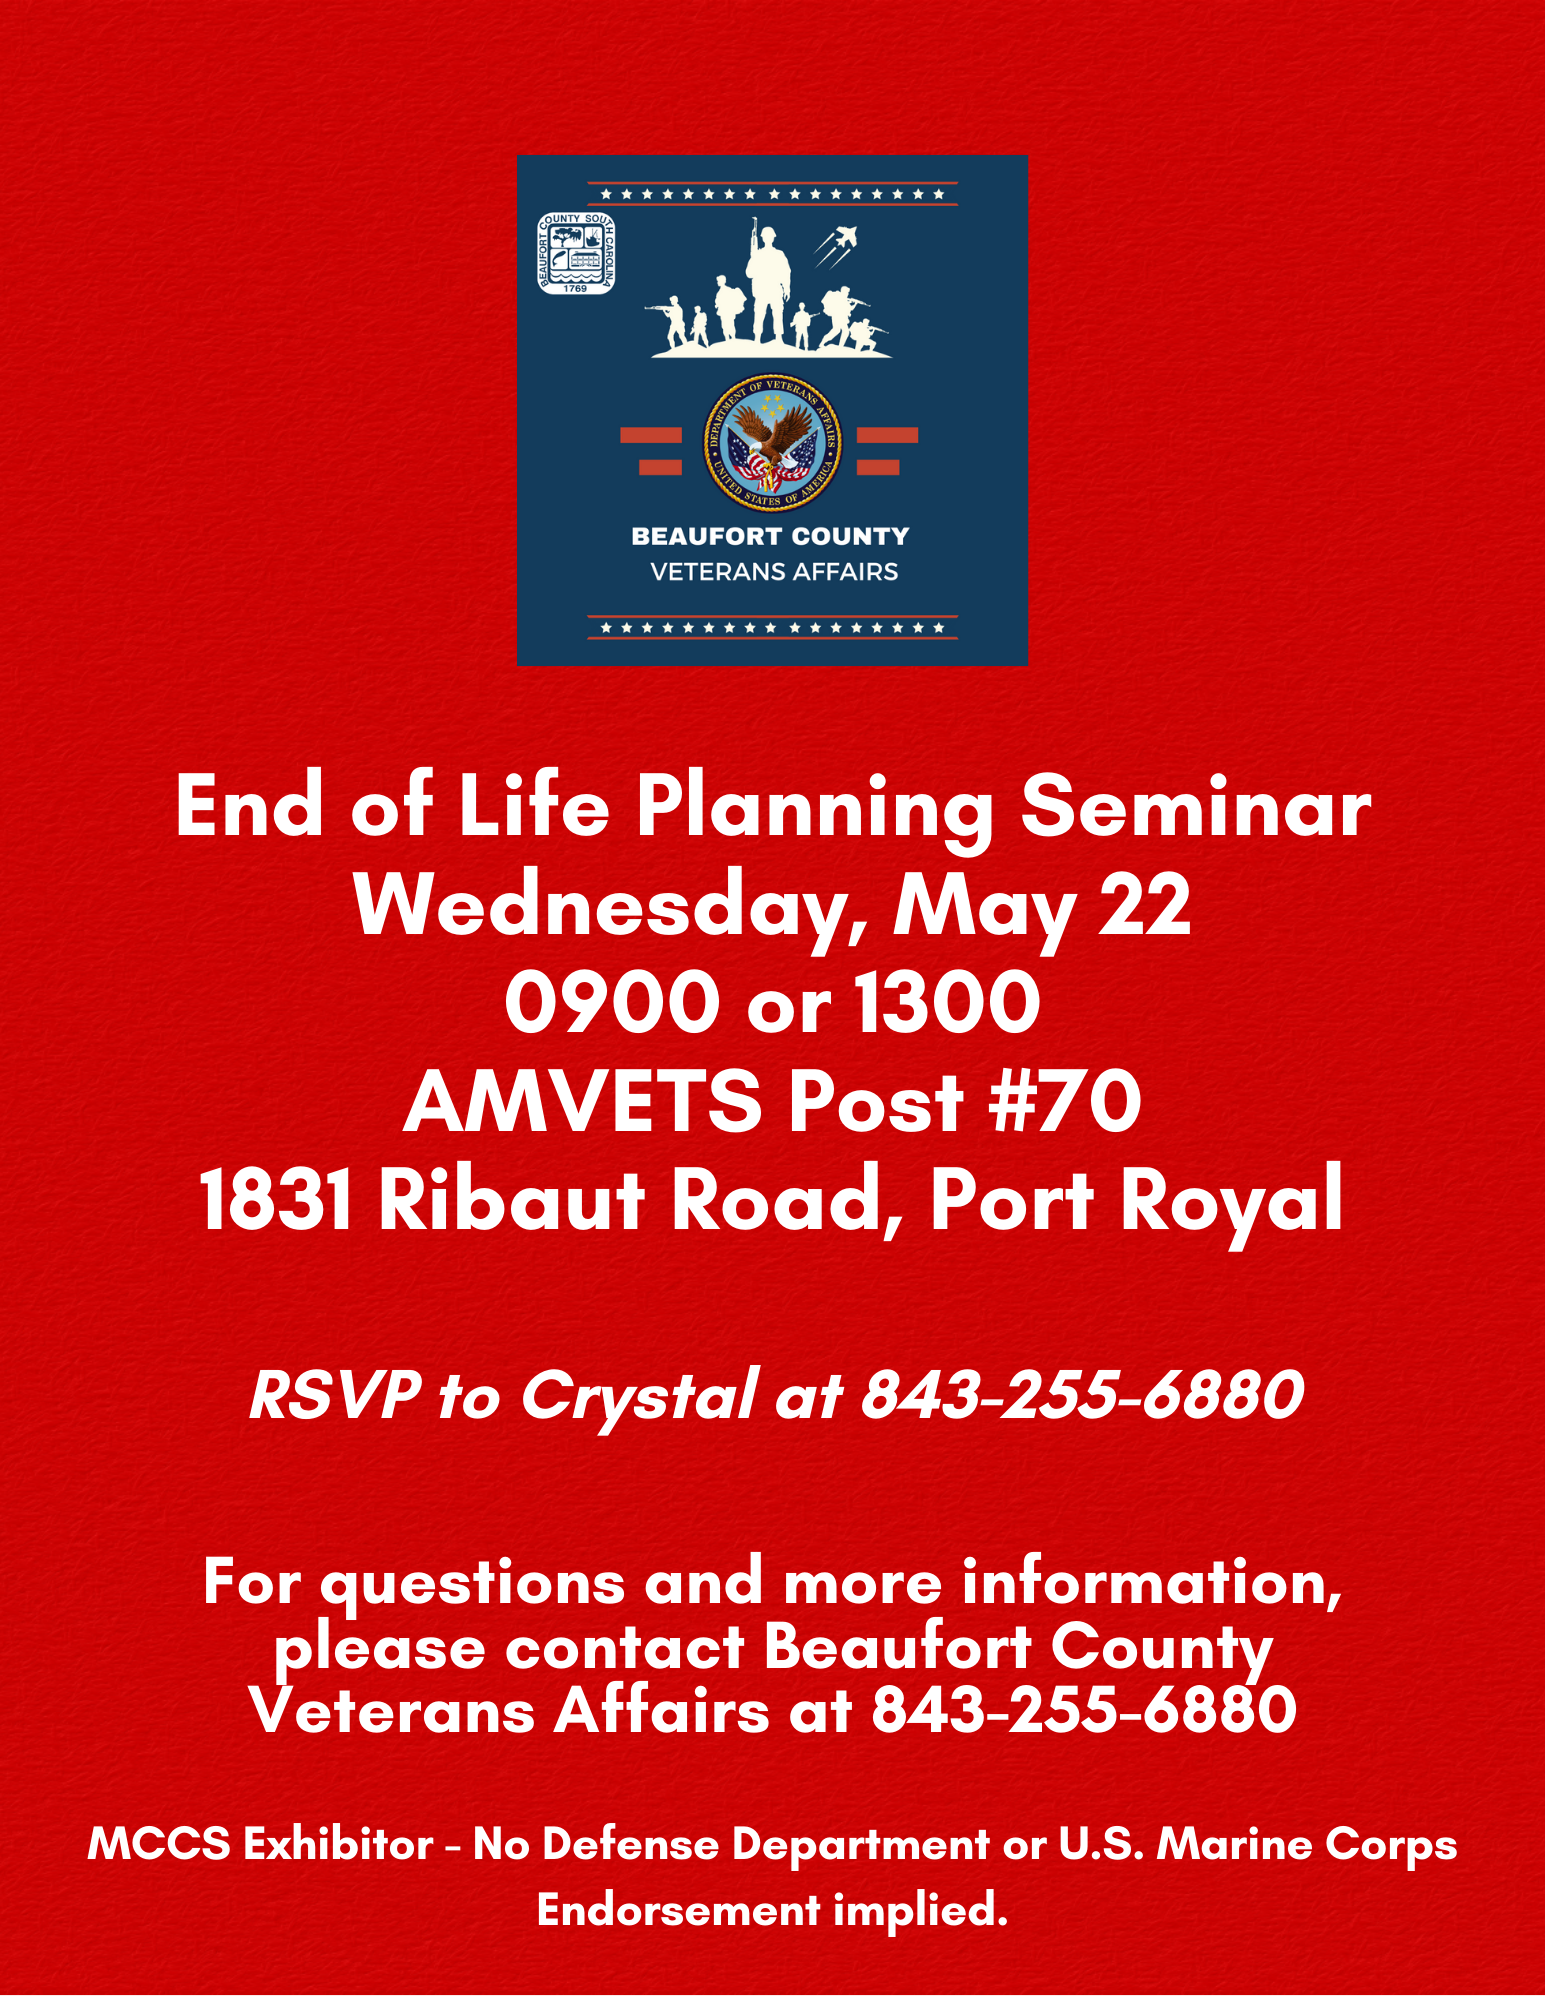 Beaufort County Veterans Affairs to Offer End of Life Planning Seminar for Veterans and Families